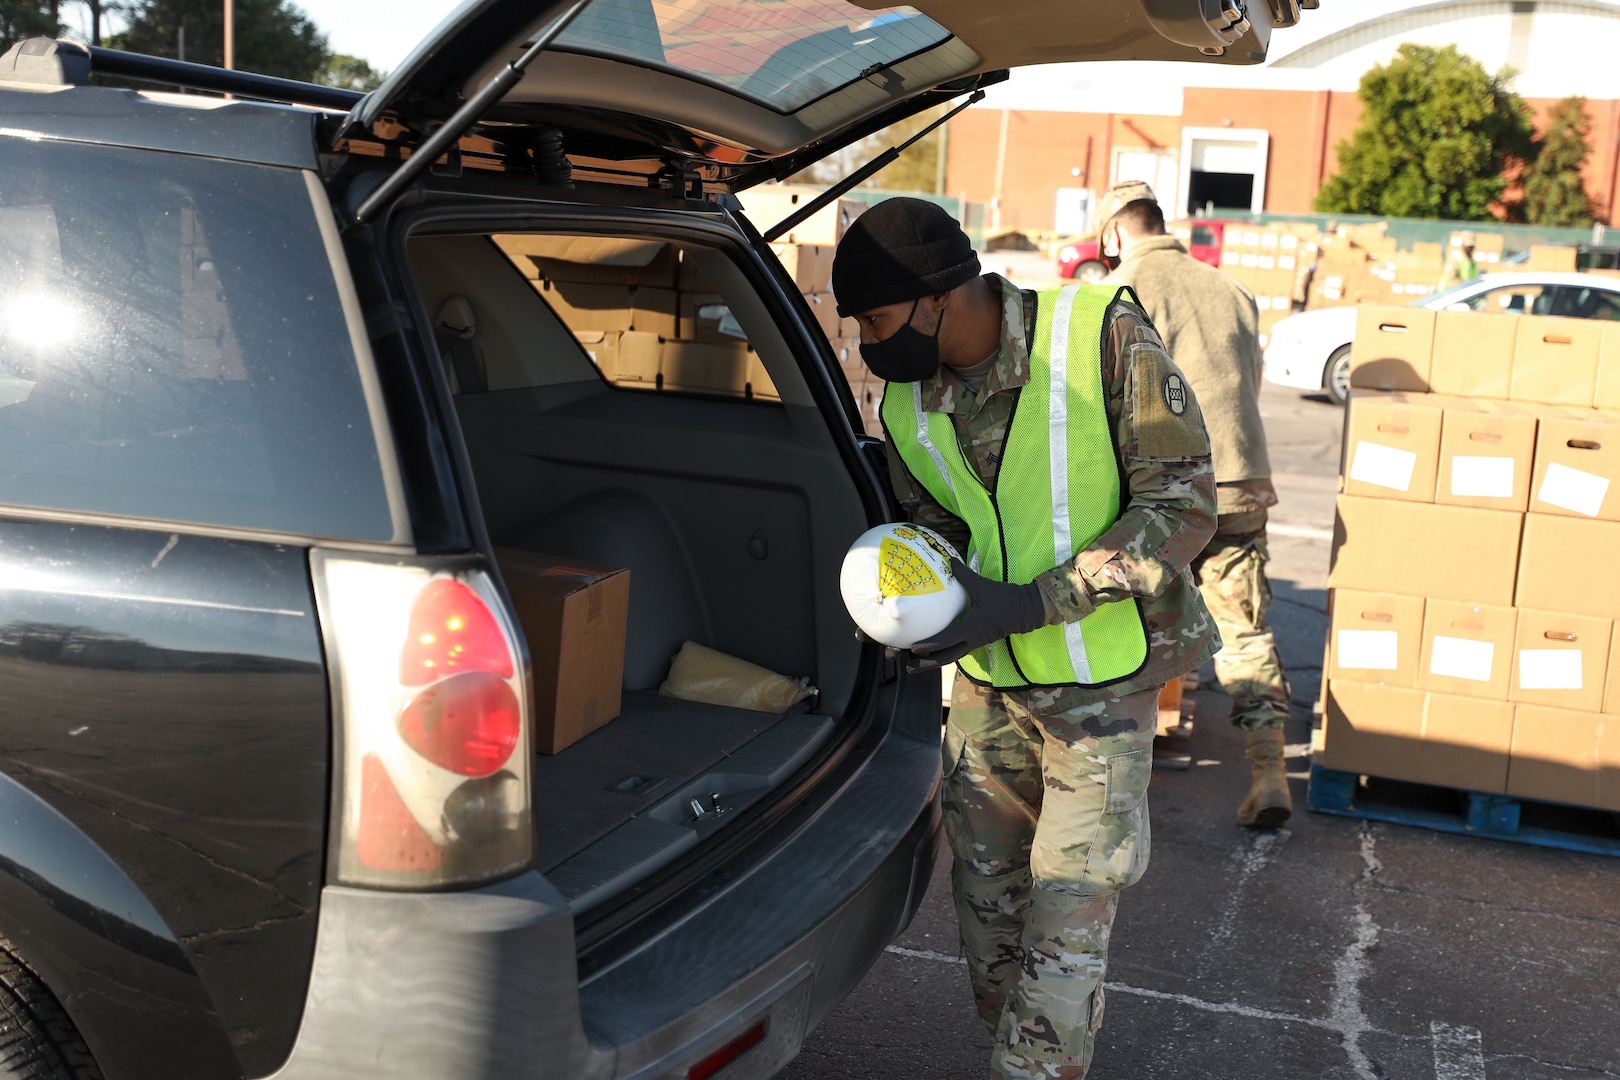 Sgt. Shaquille Ralls, assigned to the North Carolina Army National Guard’s G Company, 230th Brigade Support Battalion, places a frozen hen into a car during a mass food distribution sponsored by the Second Harvest Food Bank of Southeastern North Carolina at the Crown Coliseum in Fayetteville Nov. 24, 2020. A team of 27 Soldiers and Airmen supported the event.